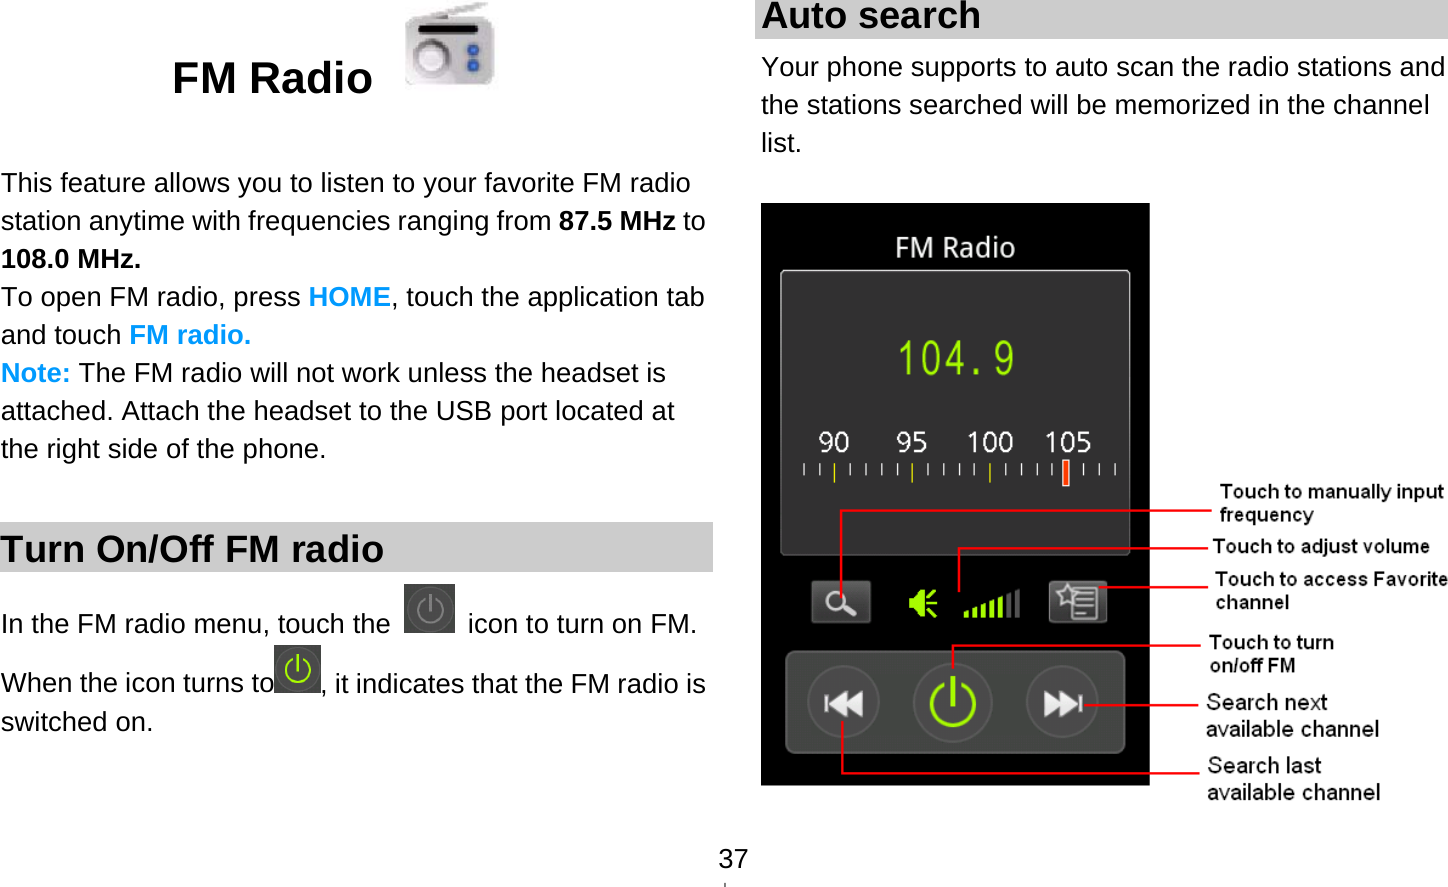   37FM Radio    This feature allows you to listen to your favorite FM radio station anytime with frequencies ranging from 87.5 MHz to 108.0 MHz. To open FM radio, press HOME, touch the application tab and touch FM radio. Note: The FM radio will not work unless the headset is attached. Attach the headset to the USB port located at the right side of the phone.  Turn On/Off FM radio In the FM radio menu, touch the    icon to turn on FM. When the icon turns to , it indicates that the FM radio is switched on.   Auto search Your phone supports to auto scan the radio stations and the stations searched will be memorized in the channel list.   